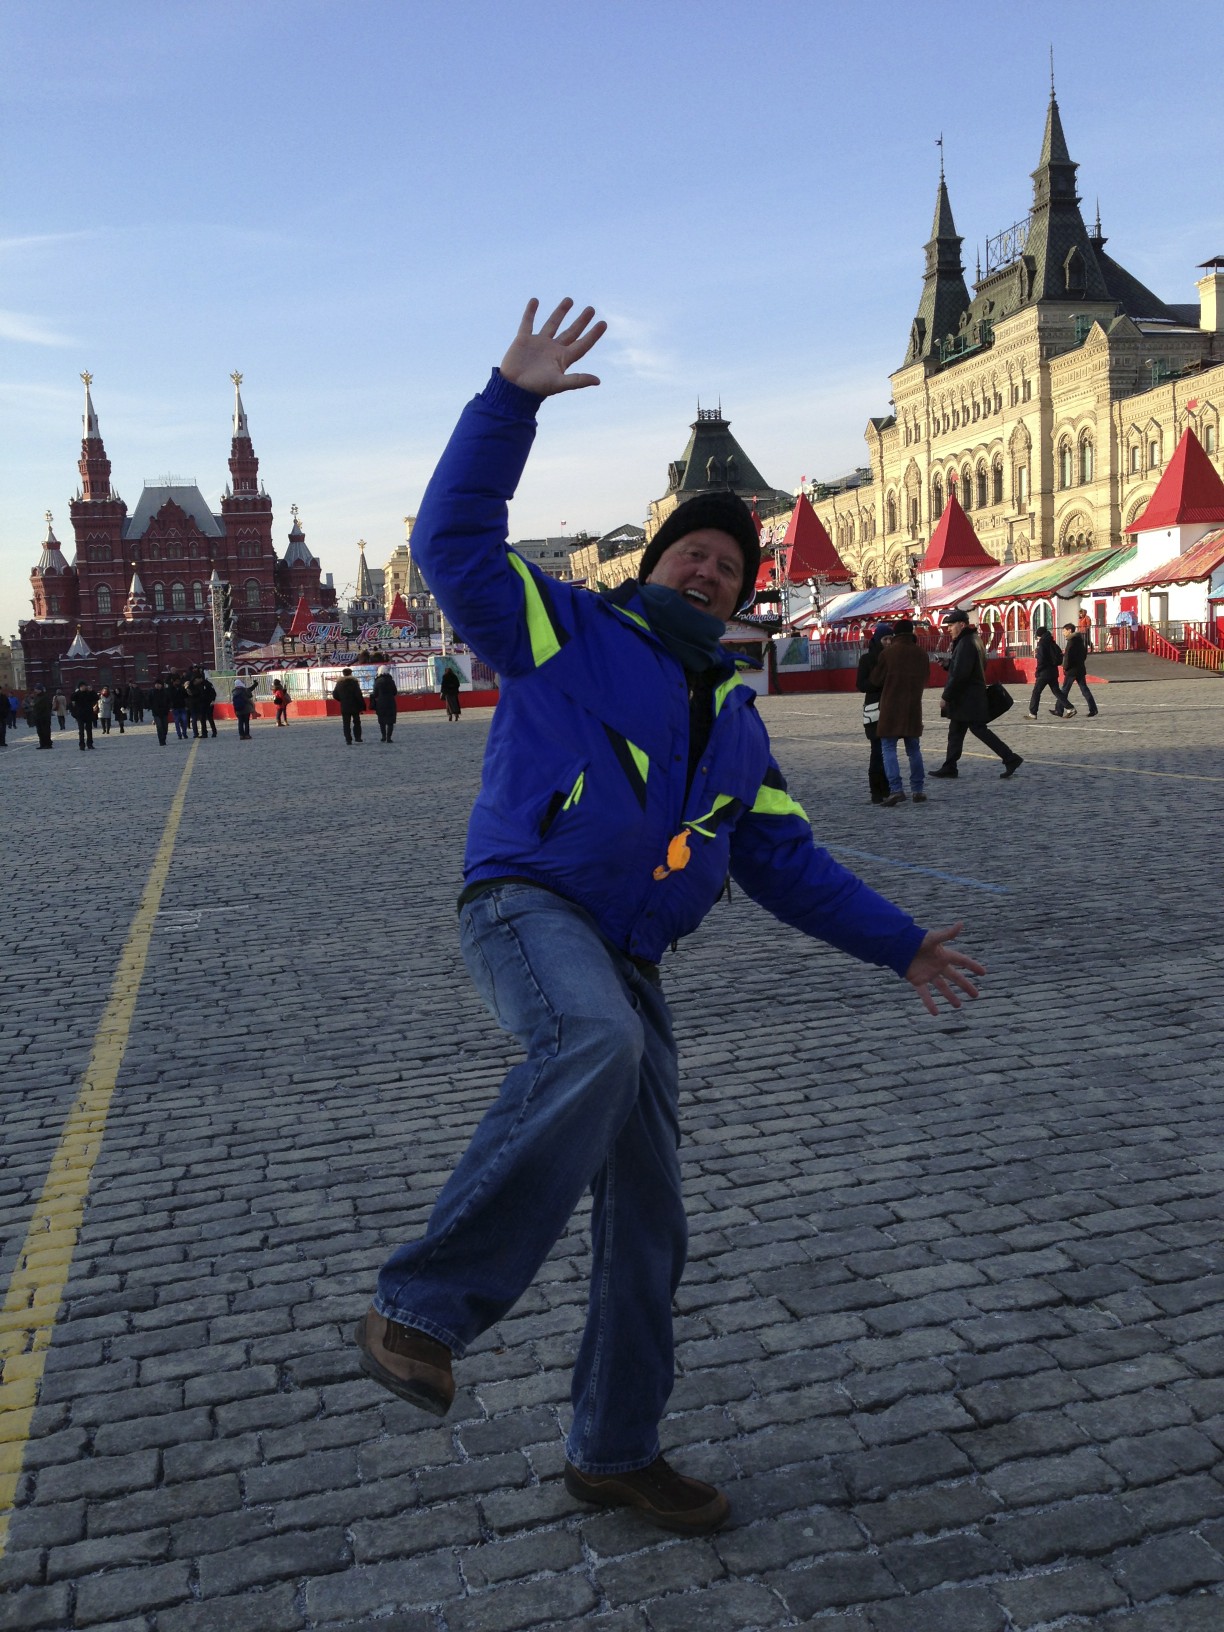 Just having fun in Moscow.